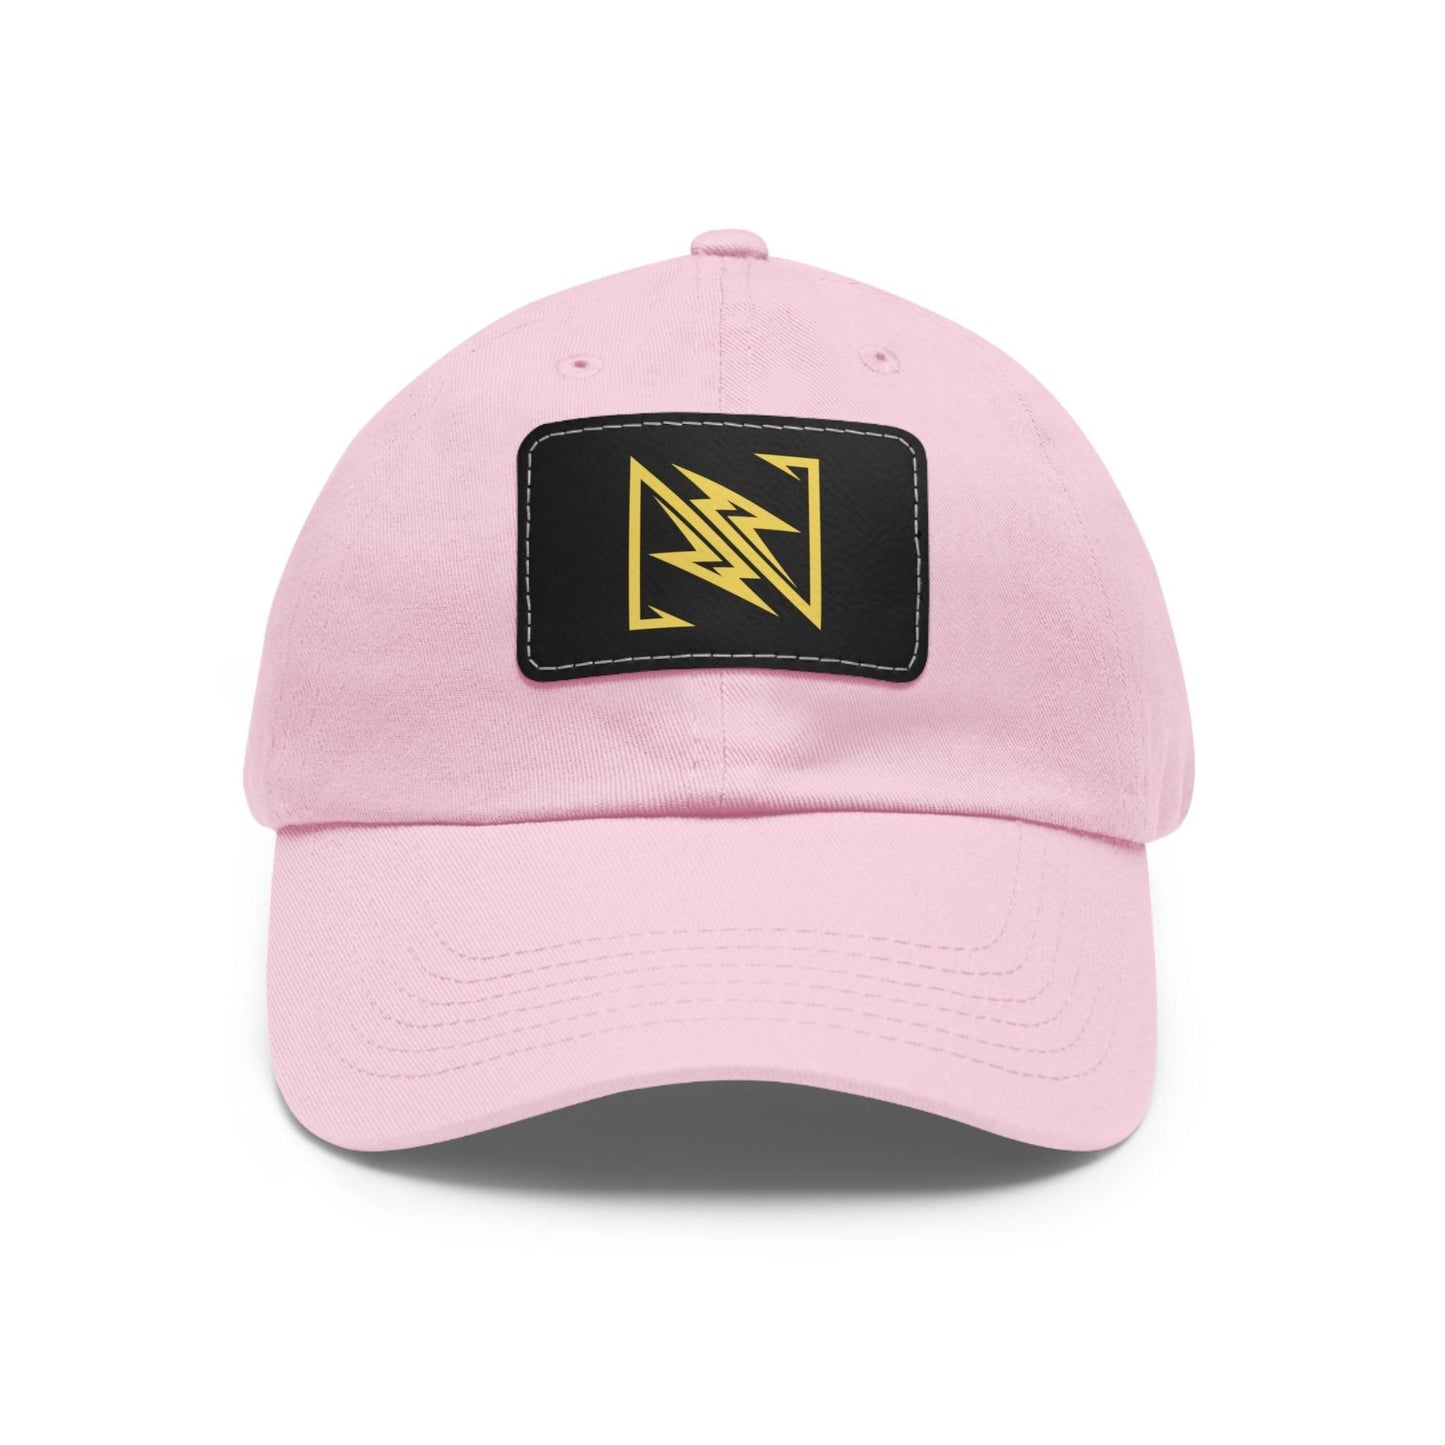 NX Vogue Premium Baseball Hat with Leather Patch Cap Light Pink / Black patch Rectangle One size